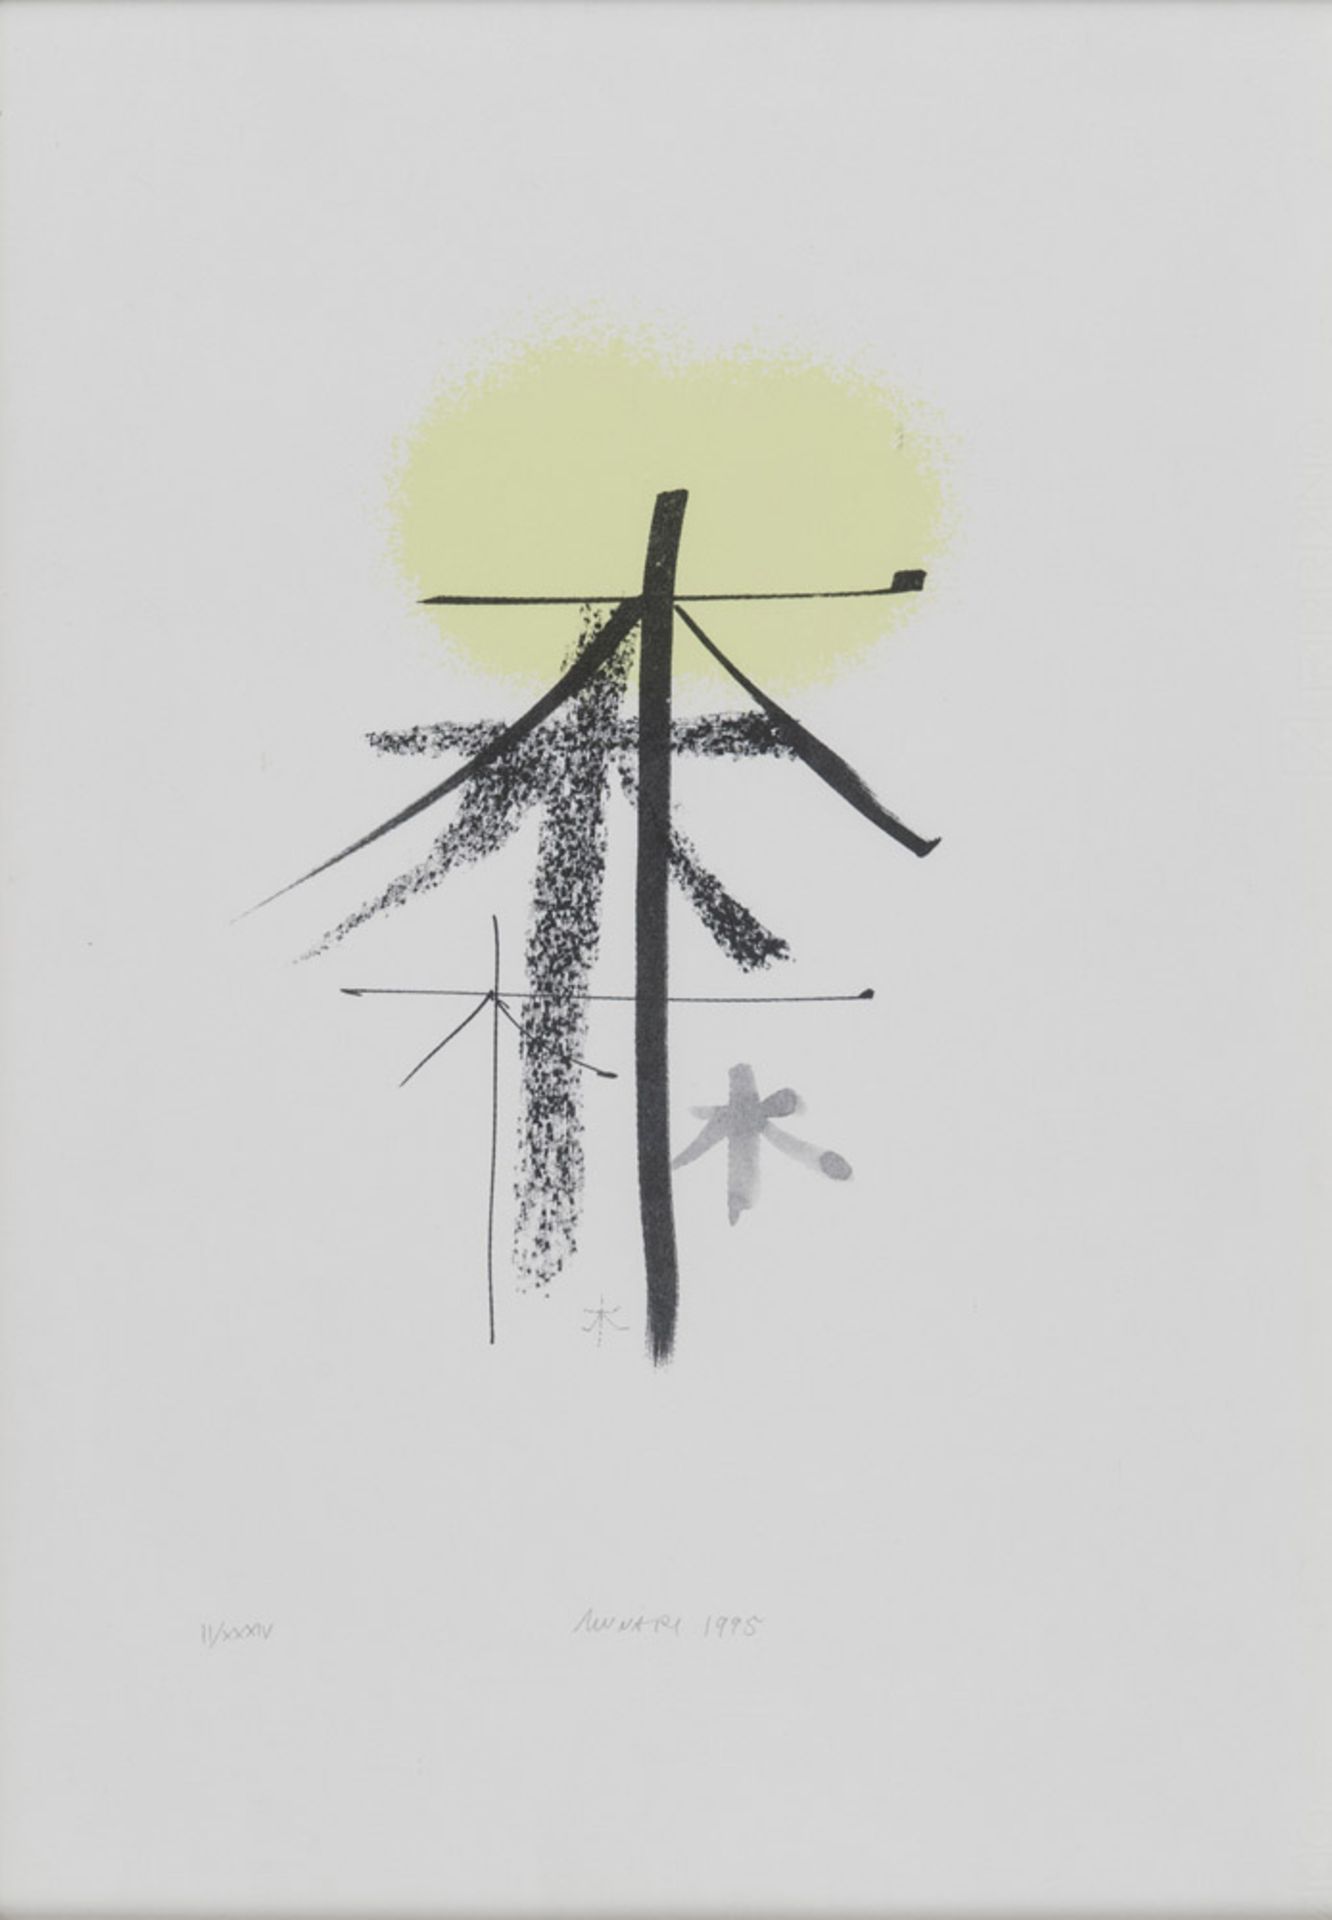 BRUNO MUNARI (Milan 1907 - 1998) Without title, 1995 Lithography, ex. II / XXXIV Measures of the